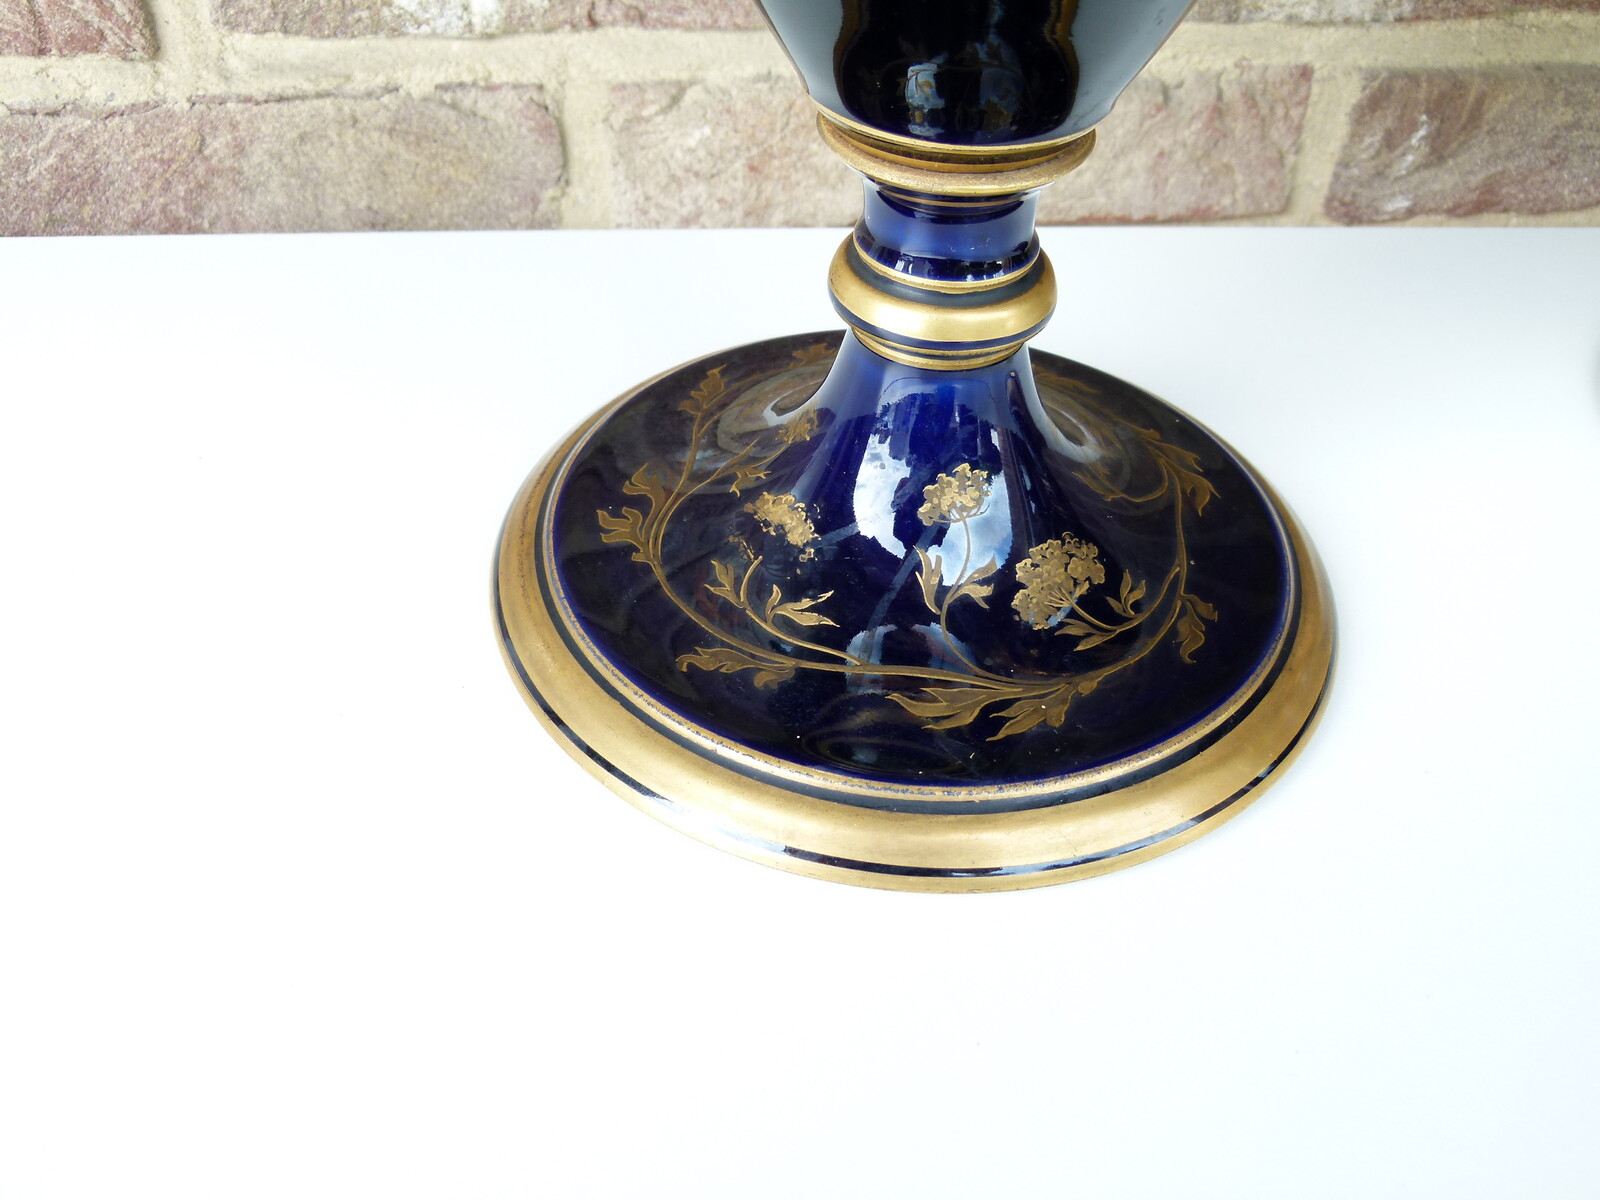 Napoleon 3 Pair vases in cobalt blue and gilt decoration of flowers